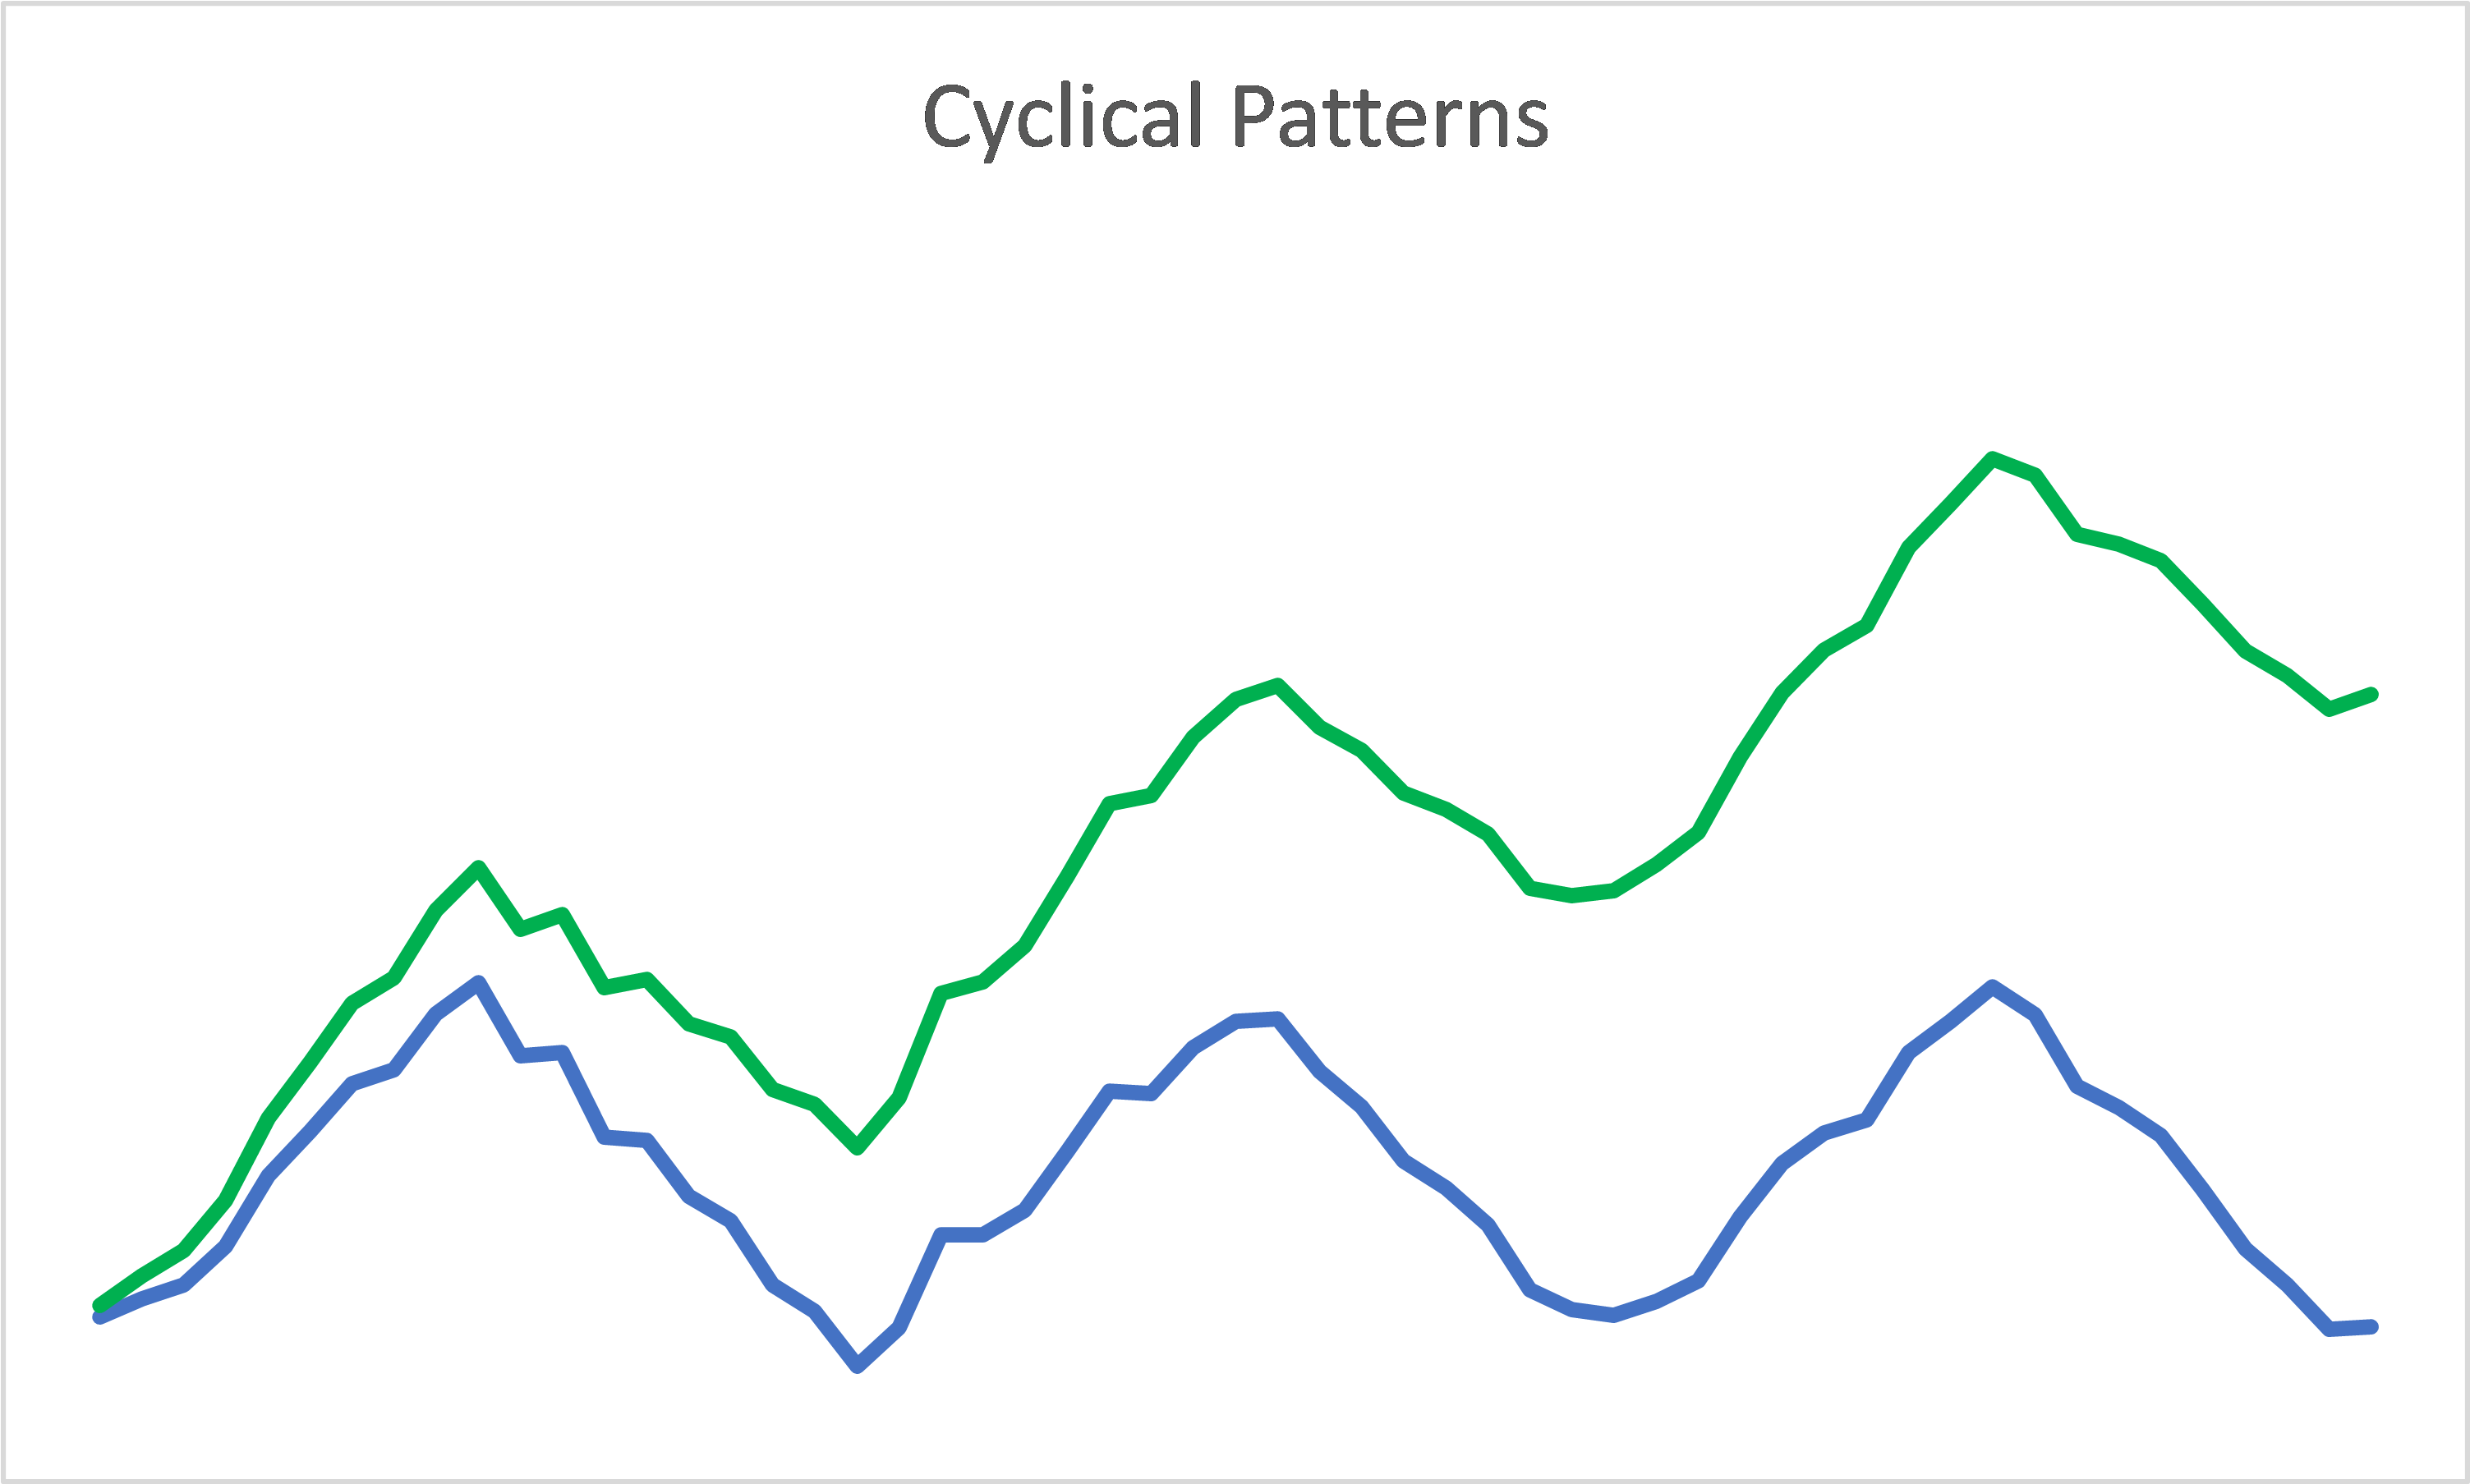 Types of Cyclical Patterns